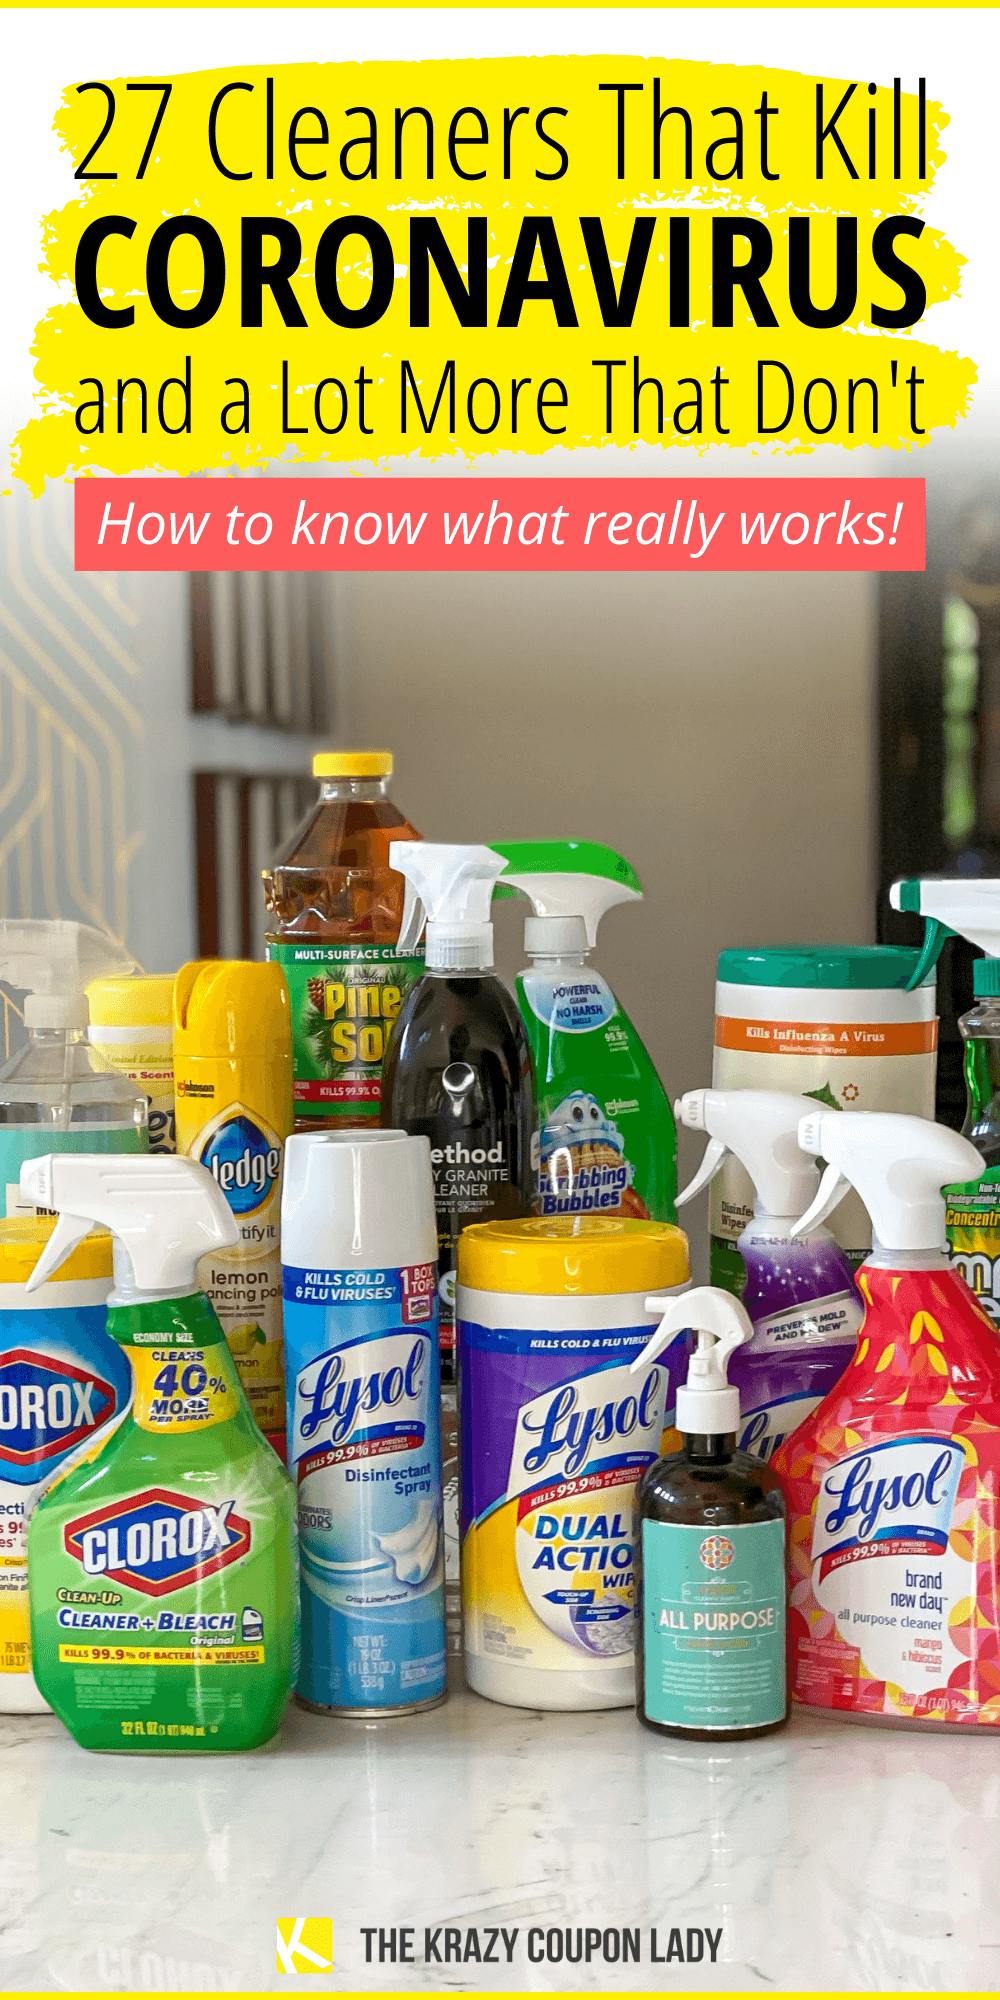 27 Cleaners That Kill Coronavirus and a Lot More That Don't